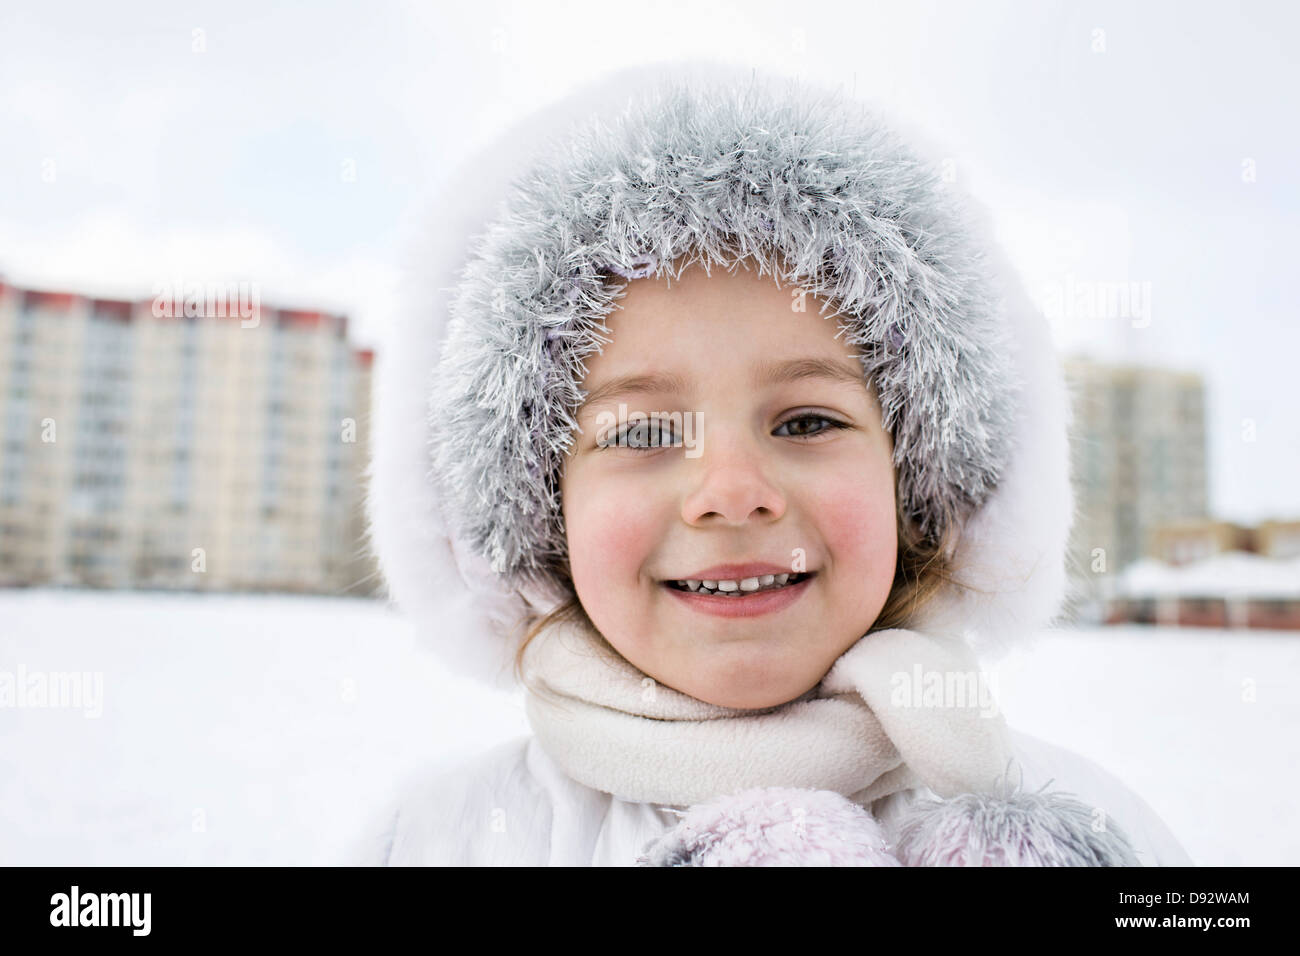 A cheerful young girl wearing warm clothing outdoors in winter Stock Photo